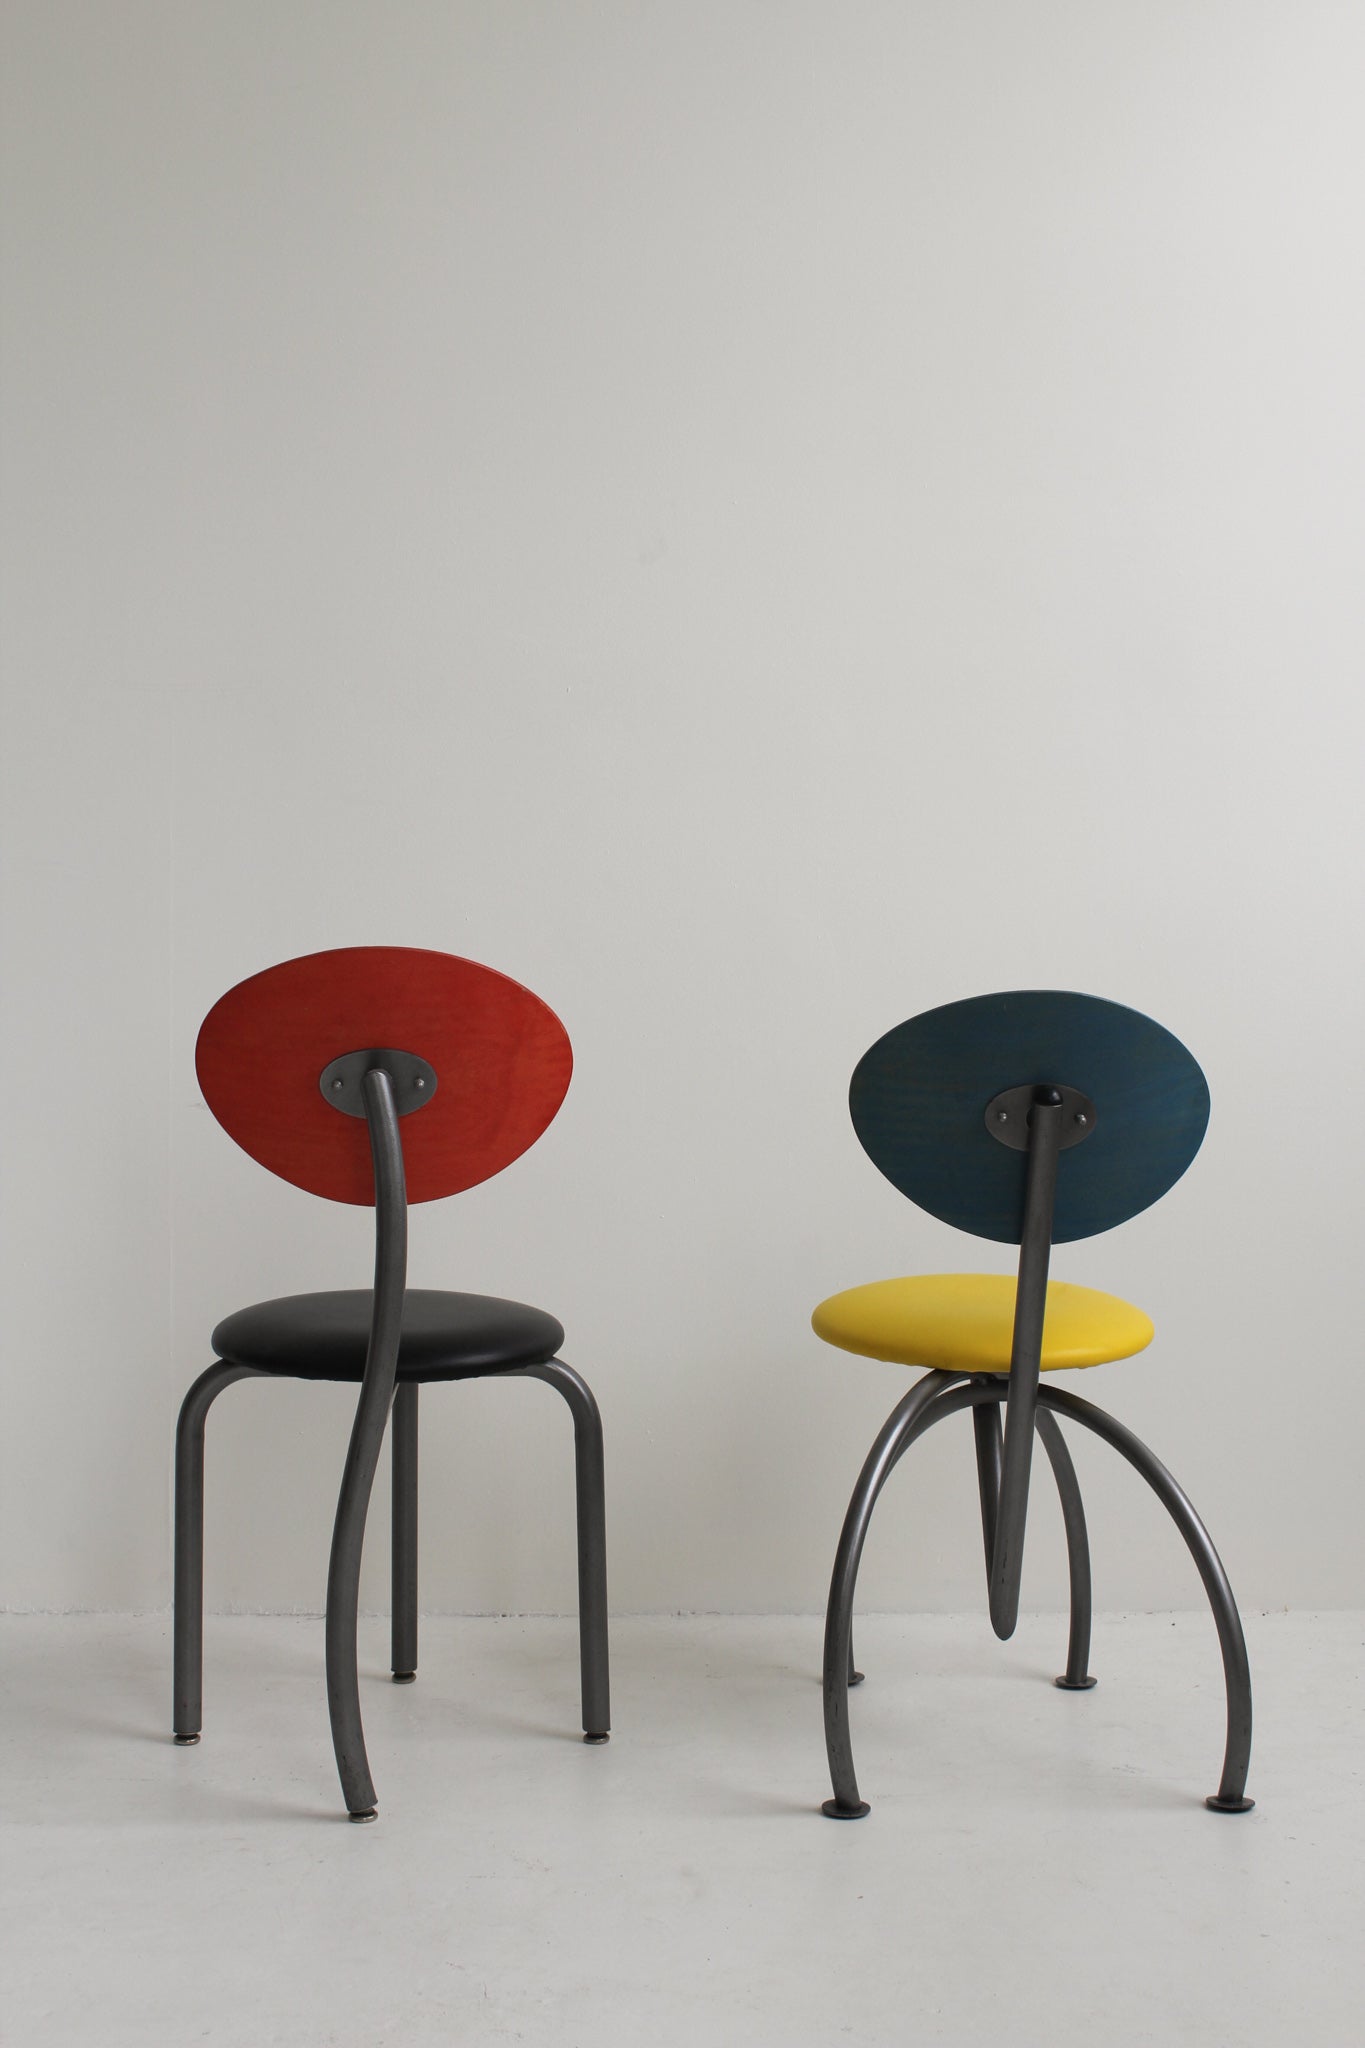 Color Block Memphis Style Chairs